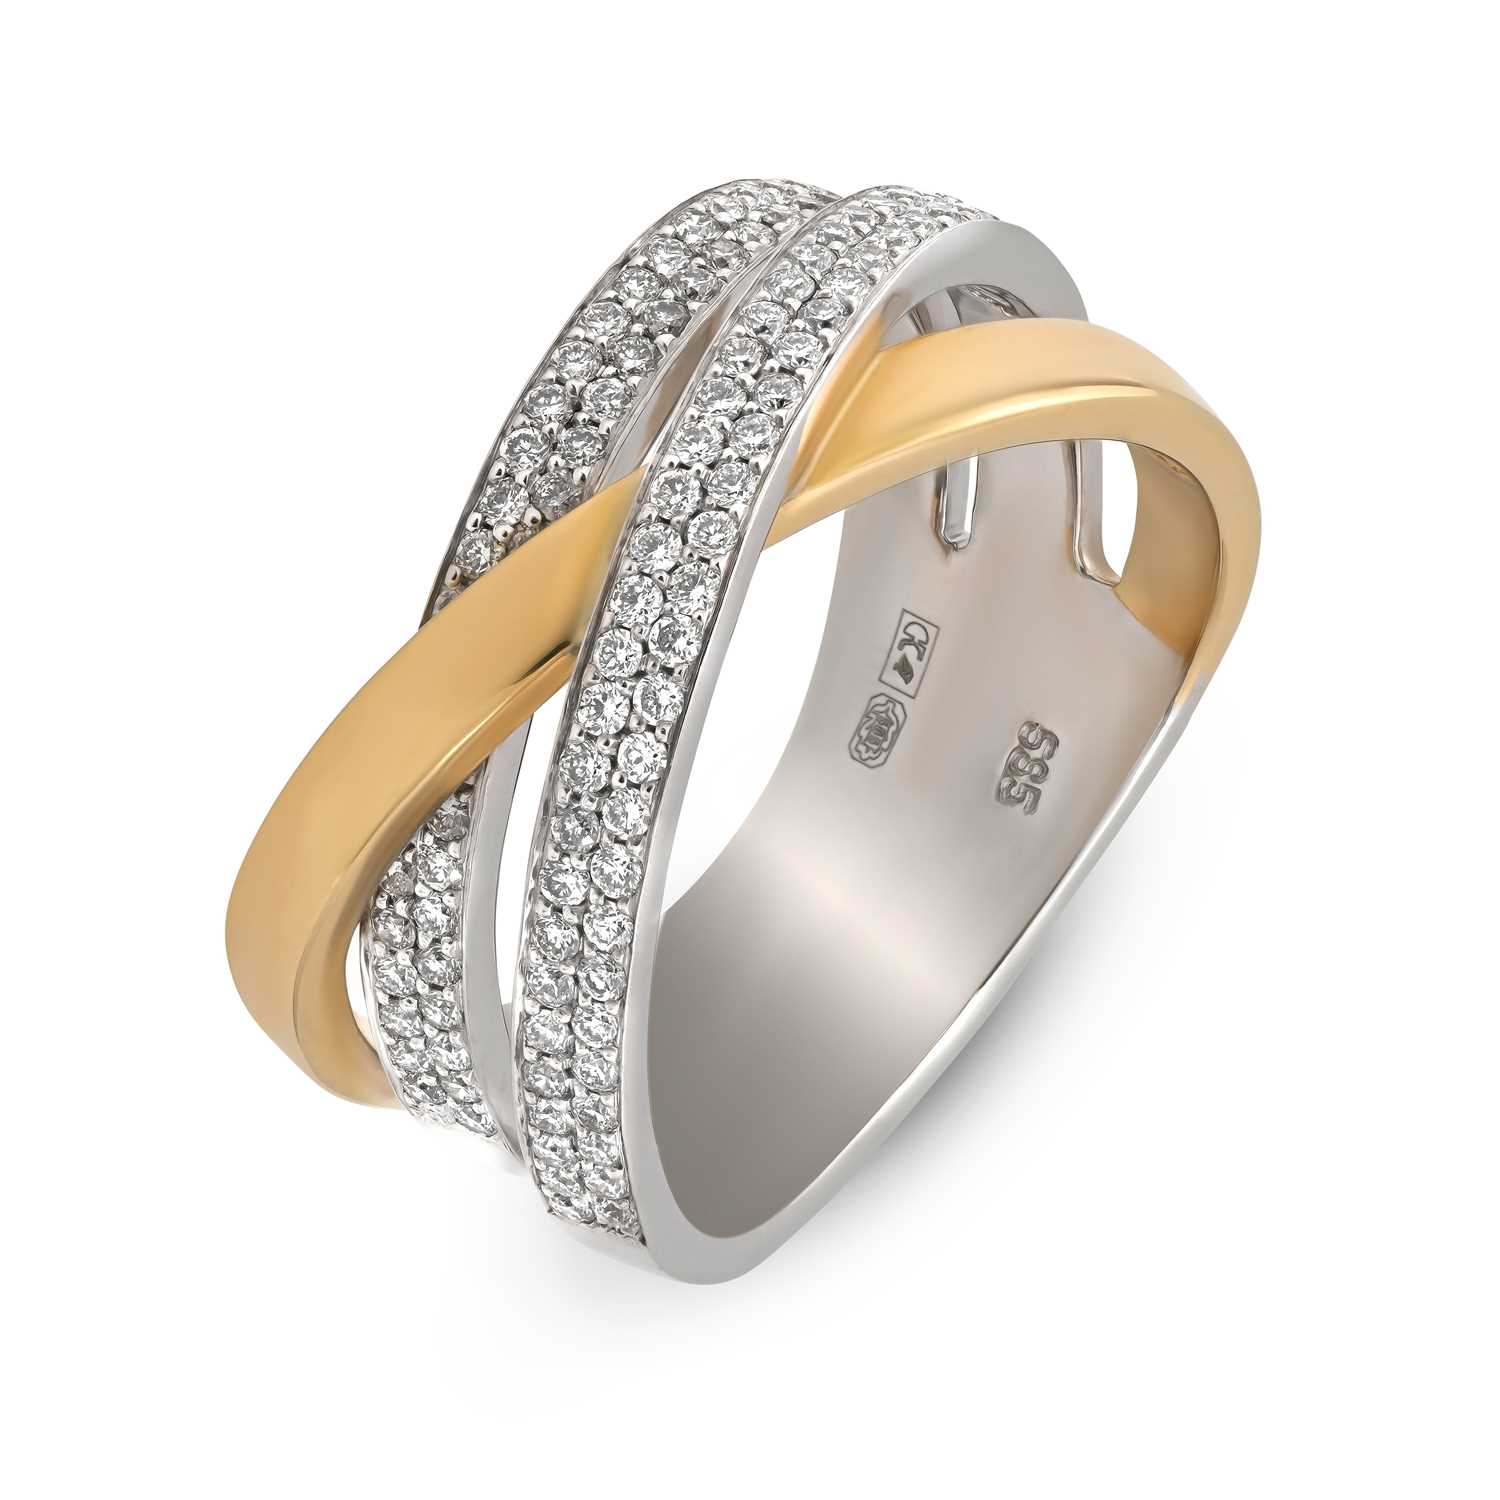 Lot 537 - 14K Gold ‘Crossover’ Eternity Ring with Diamonds